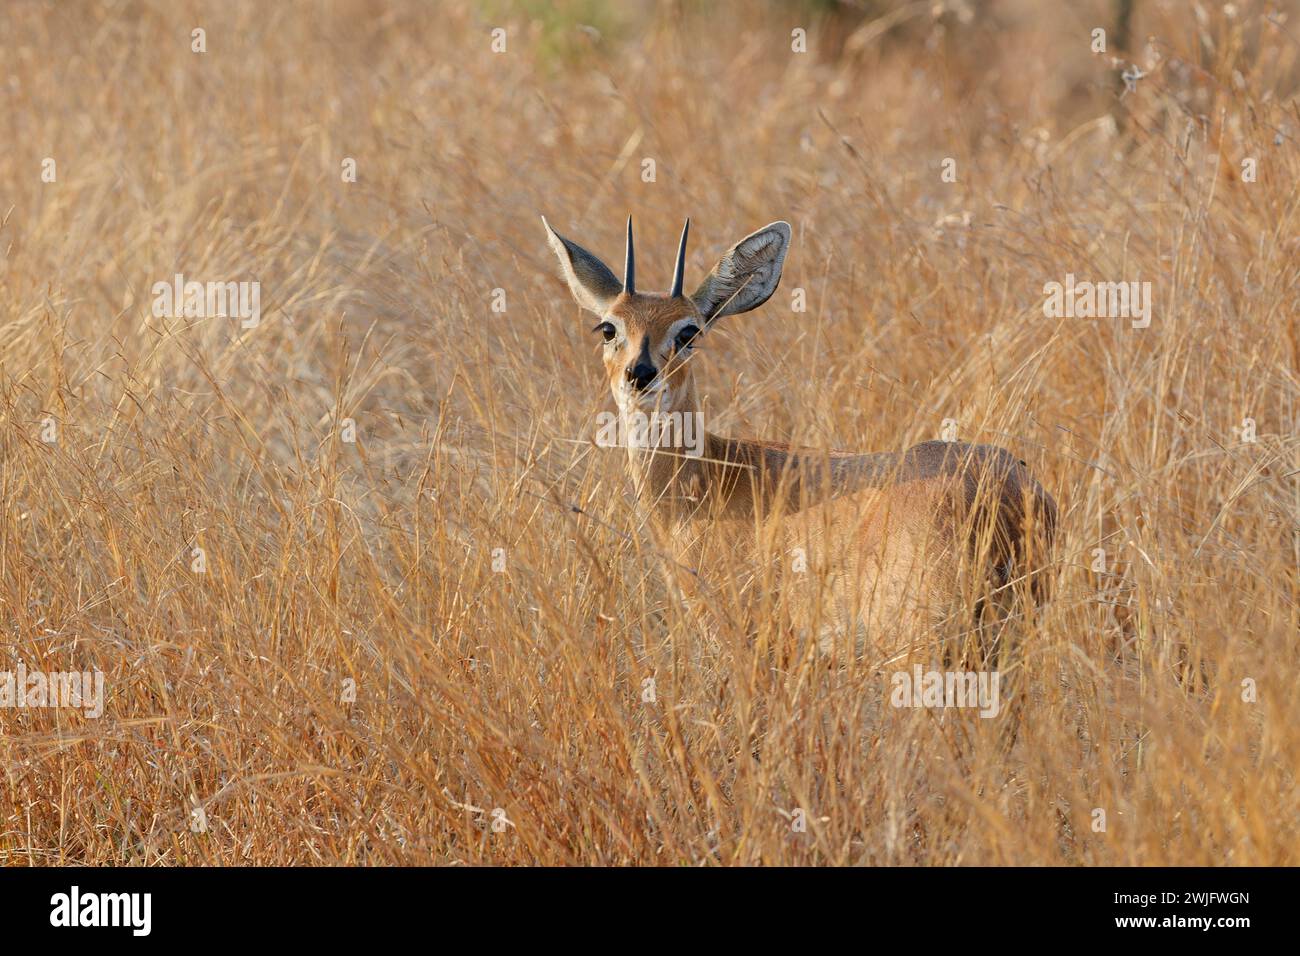 Steenbok (Raphicerus campestris), adult male standing in tall dry grass, looking at camera, alert, Kruger National Park, South Africa, Africa Stock Photo